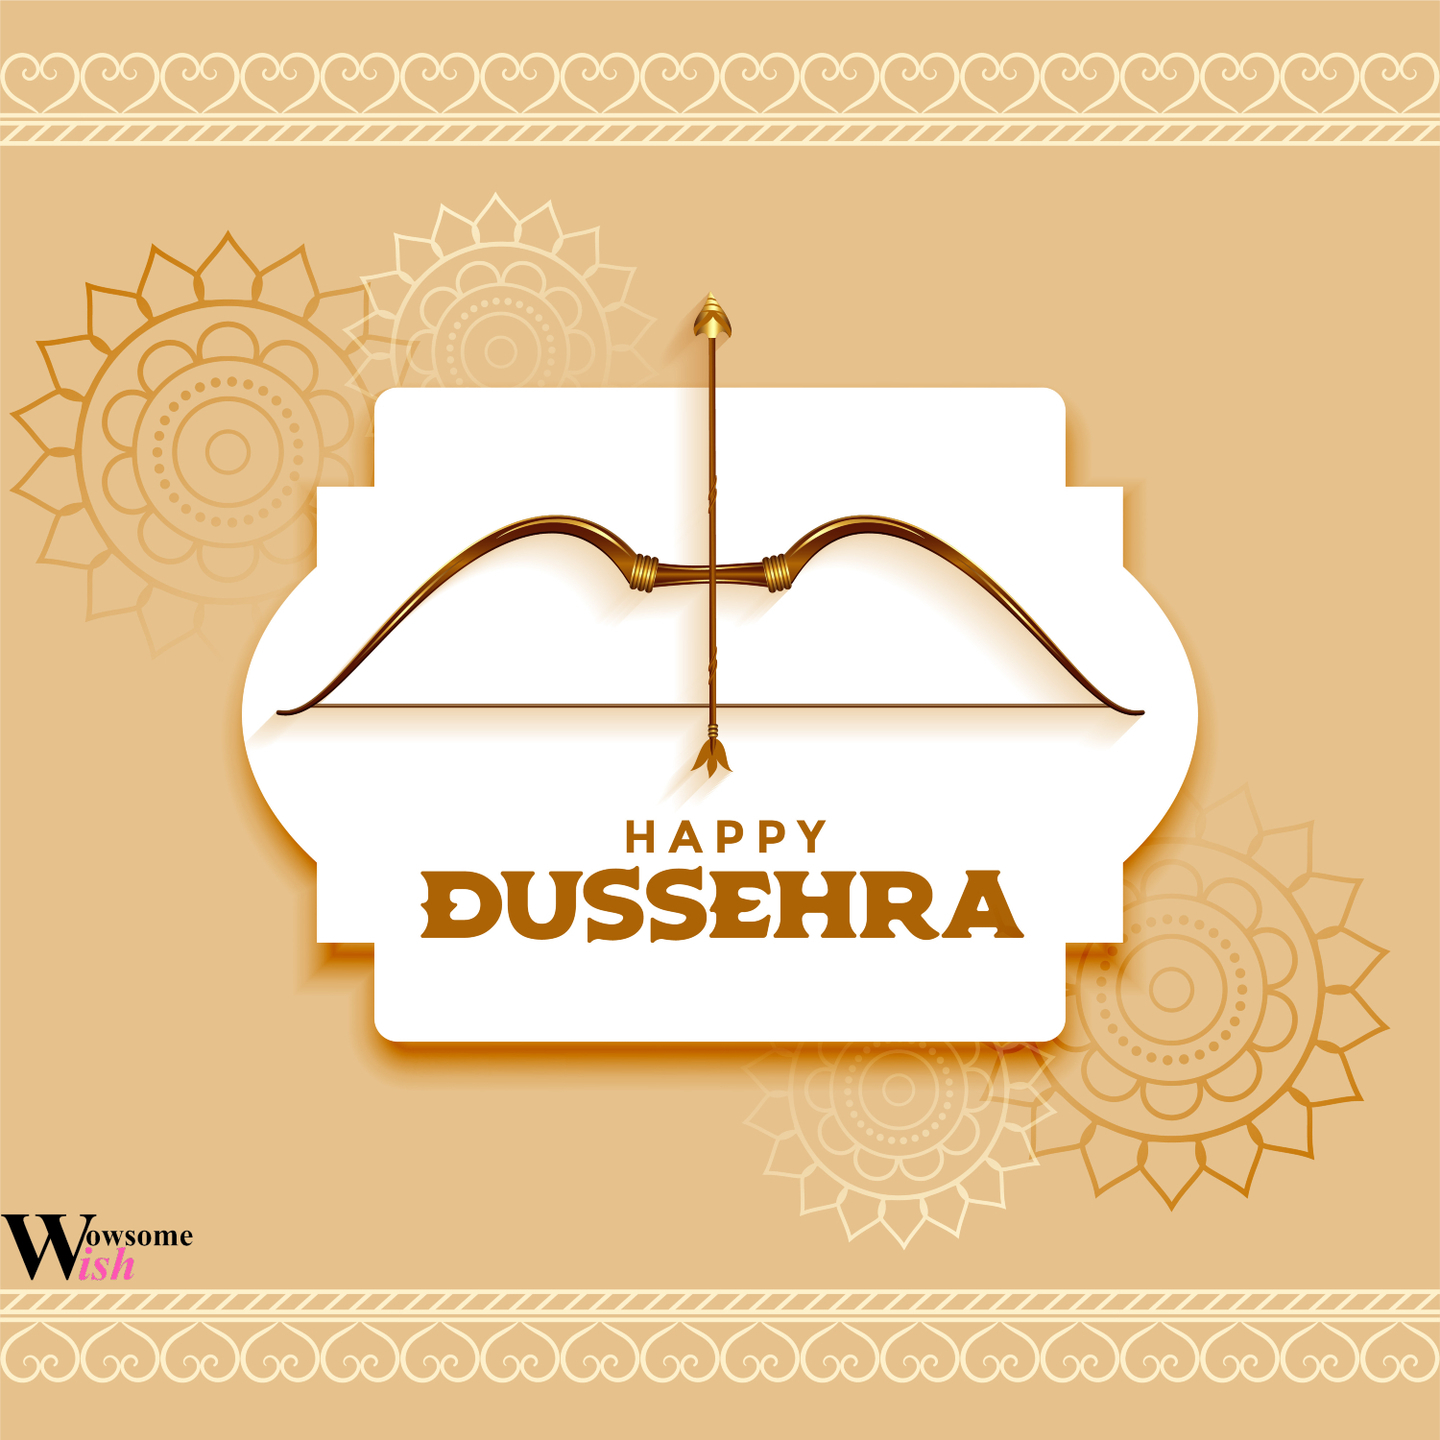 Wowsome Wish Card For Dussehra Gift